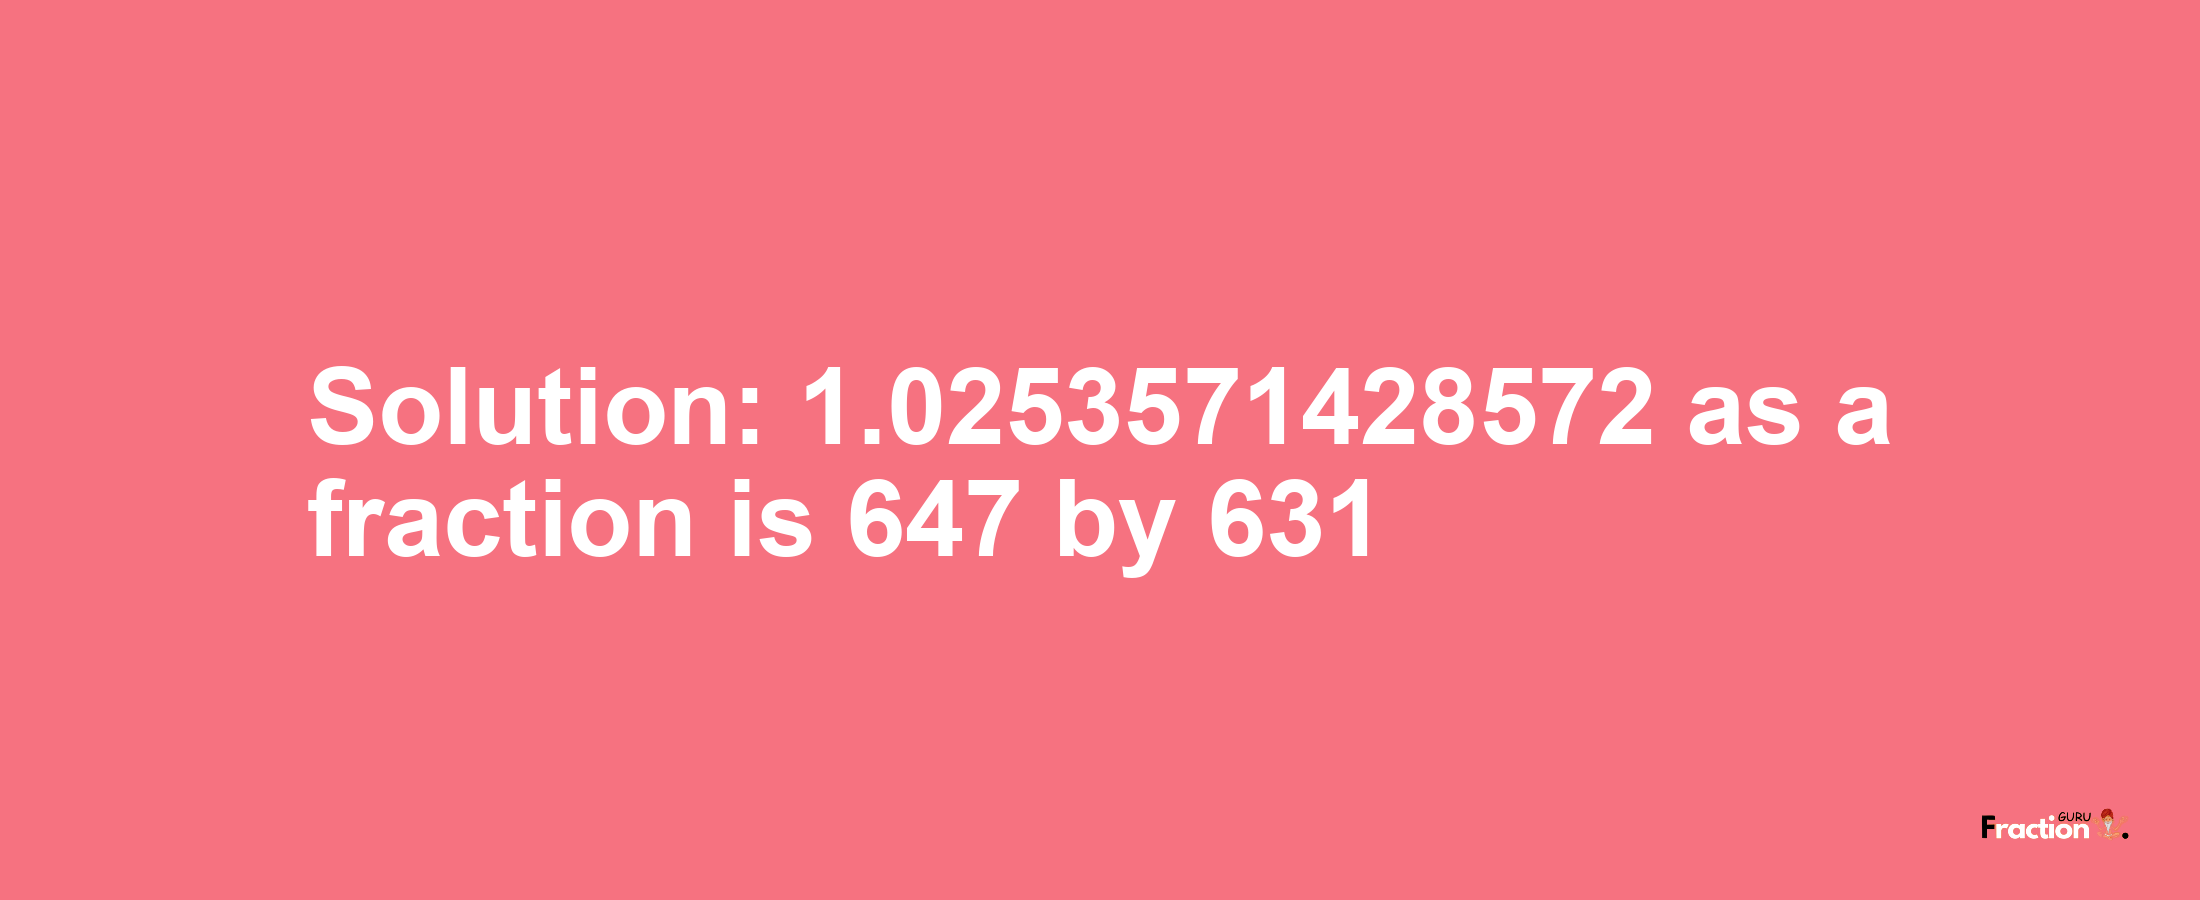 Solution:1.0253571428572 as a fraction is 647/631